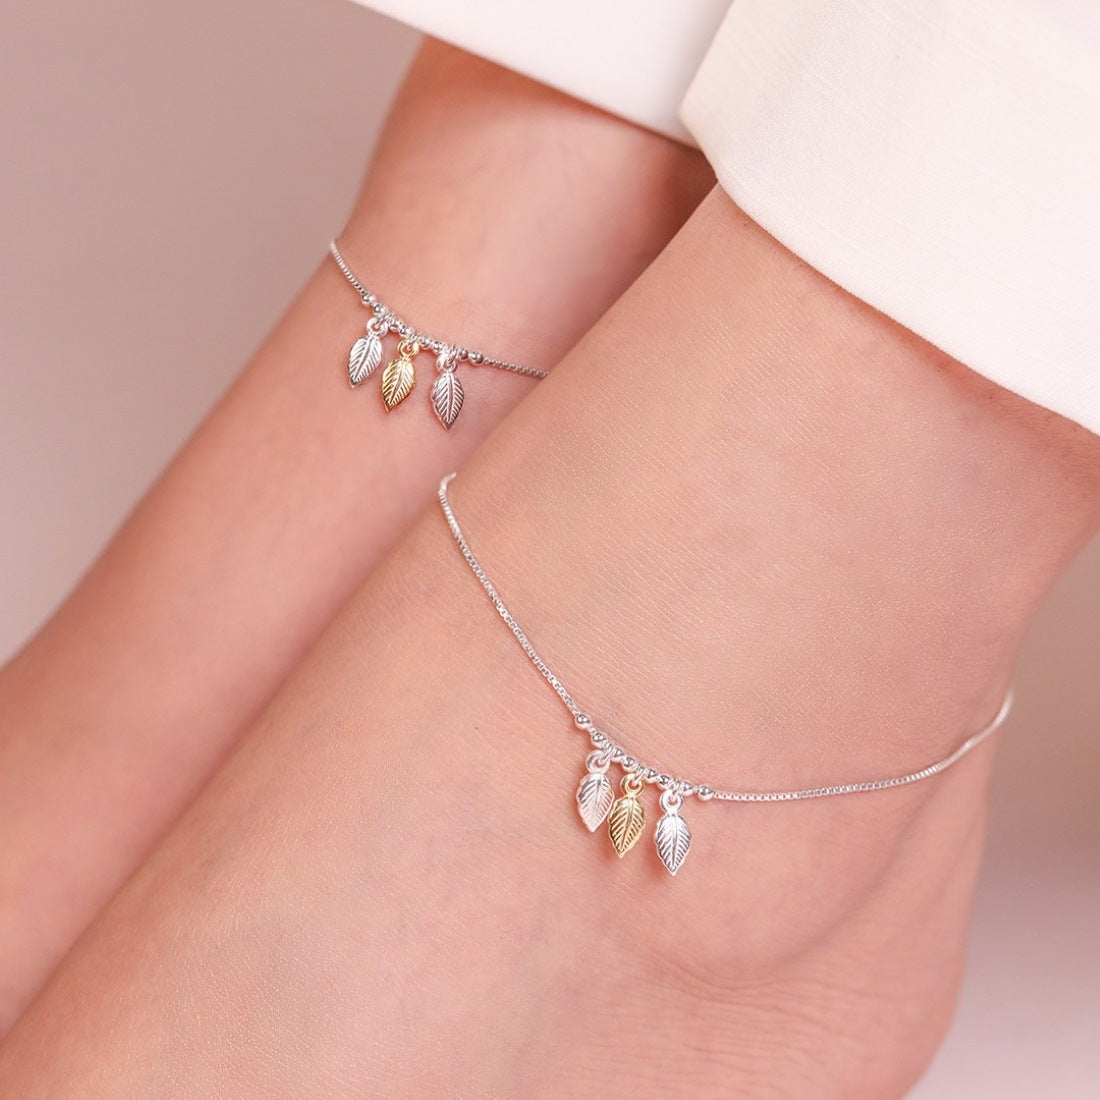 Leafy Delight Rhodium Plated 925 Sterling Silver Anklet with Leaf Pattern